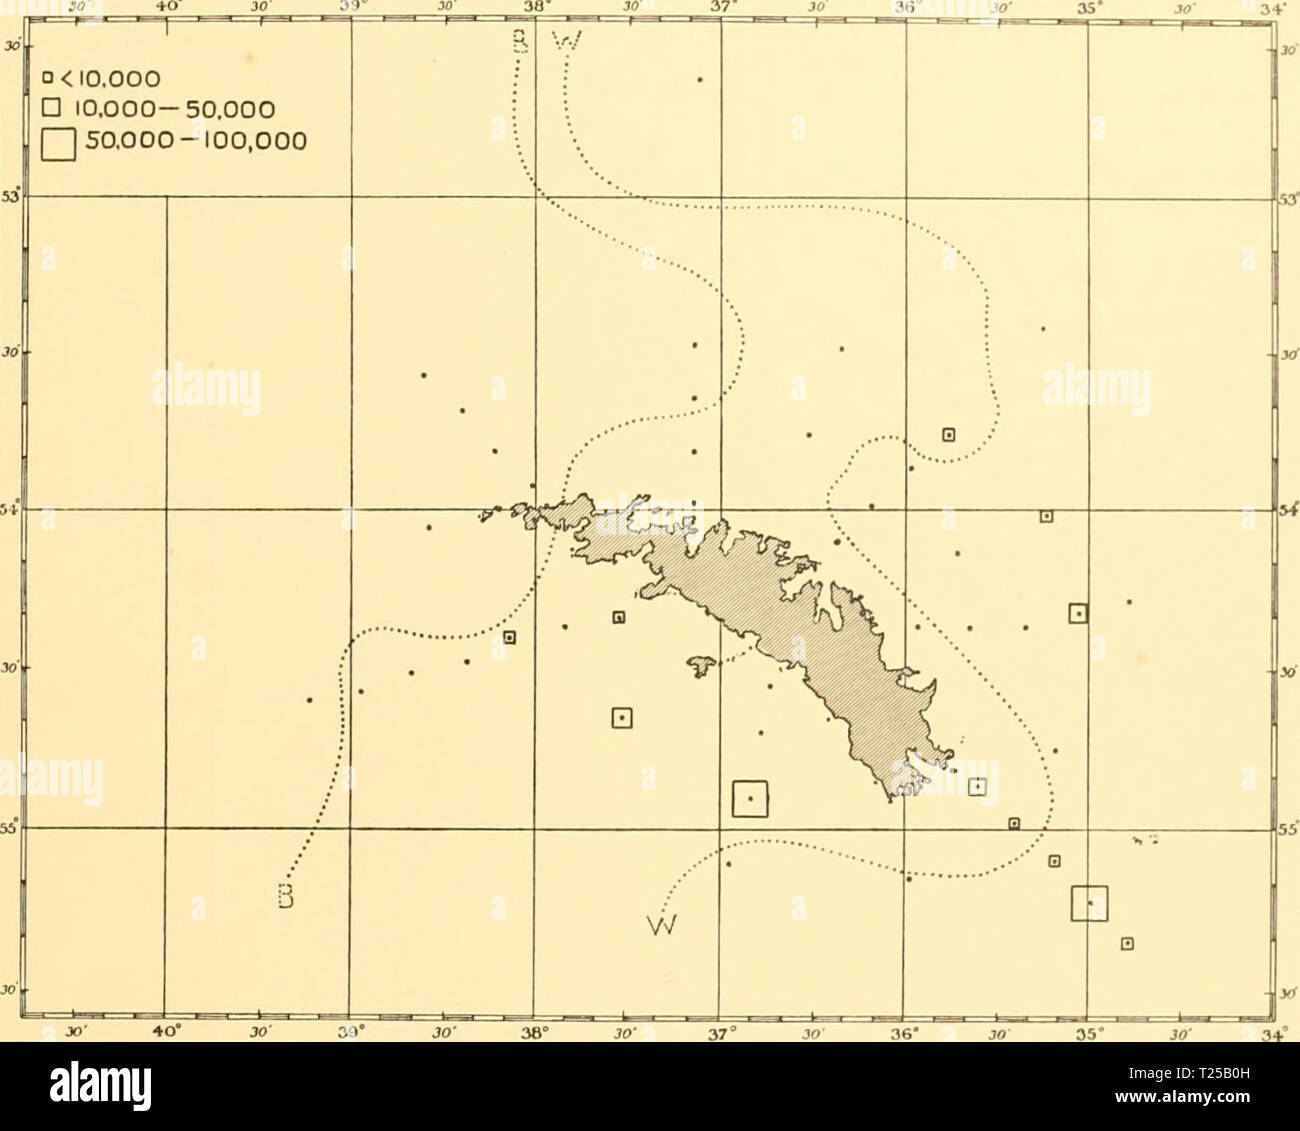 Archive image from page 74 of Discovery reports (1935-1936) Discovery reports  discoveryreports11inst Year: 1935-1936  DISTRIBUTION OF PHYTOPLANKTON 59 abundant (1,176,000) at St. 161 far to the south-west of the island. It was present in small numbers at Sts. 160, WS 67 and WS 68, between South Georgia and the Falkland Islands, extending just across the Antarctic Convergence. Small numbers were also taken on the C line in late May 1927. Another species of Fragilaria whose identity was not determined was noted in small numbers at WS 35.    Fig. 29. Distribution of Biddulphia striata round Sout Stock Photo